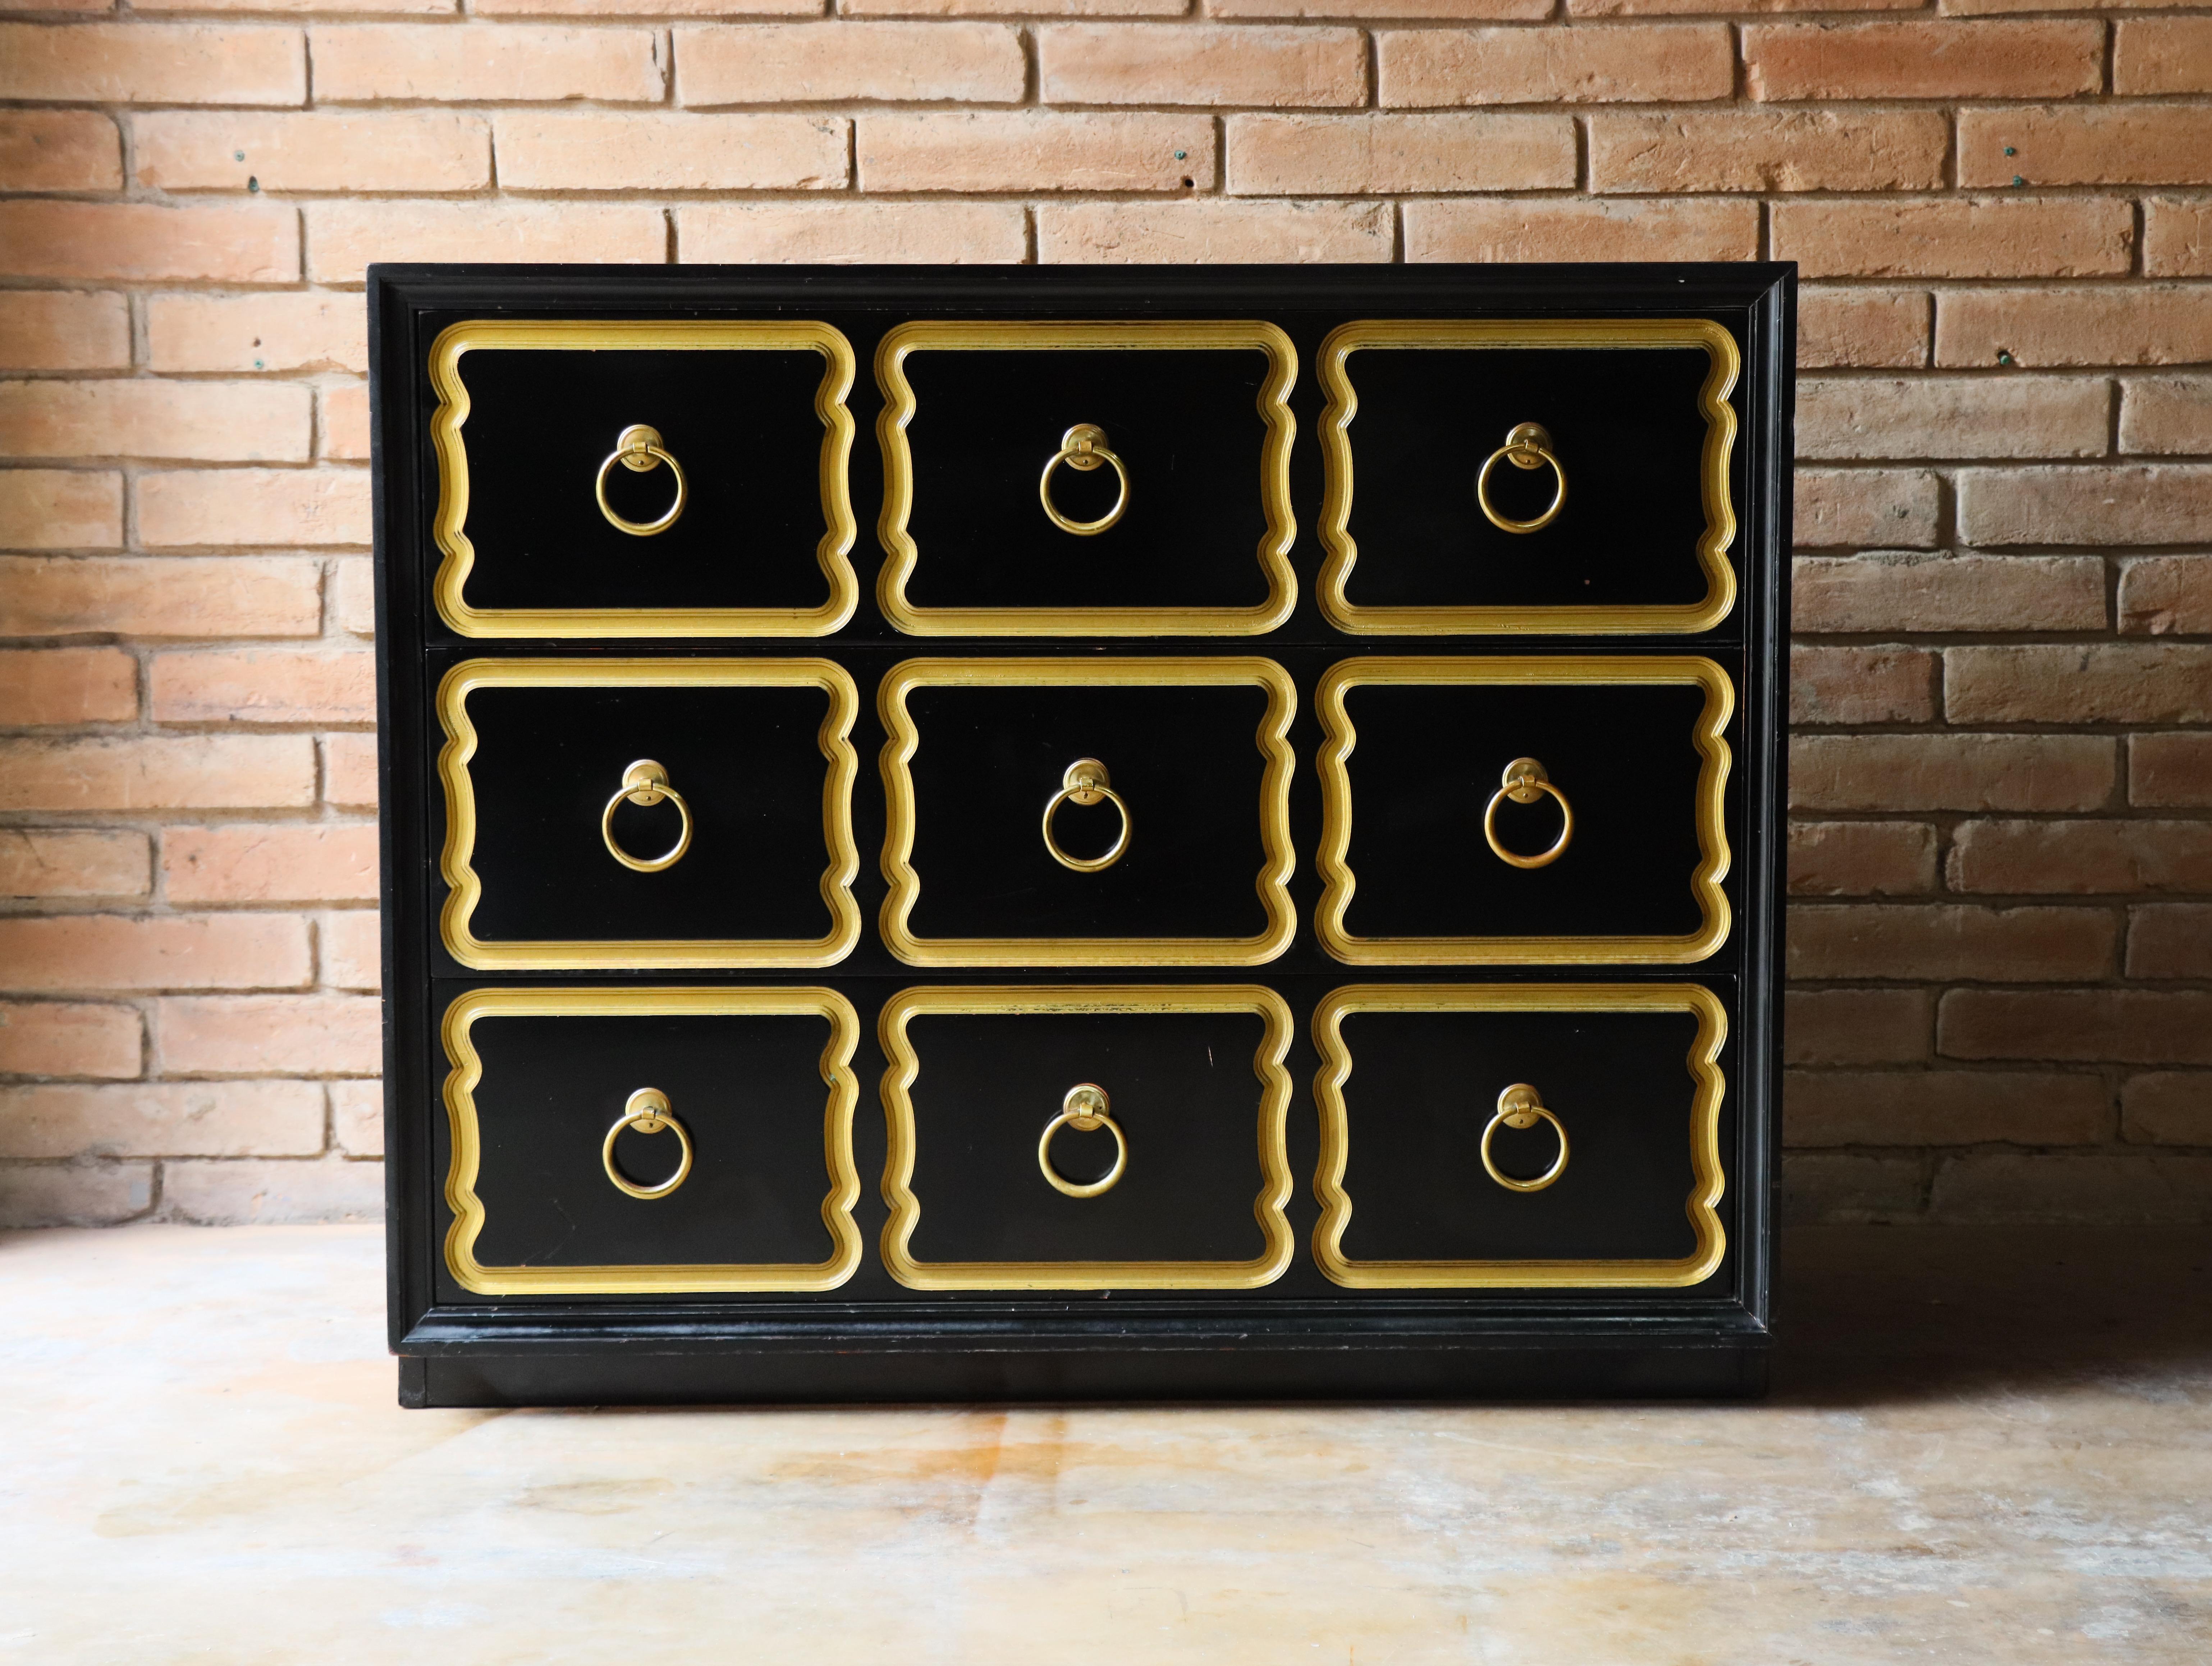 Authentic vintage ‘España’ chest of drawers designed by Dorothy Draper for Herendon / Heritage. Designed in 1955, this example is in black lacquer with parcel gilt and brass hardware. This one would be perfect for an entry way or little nook needing